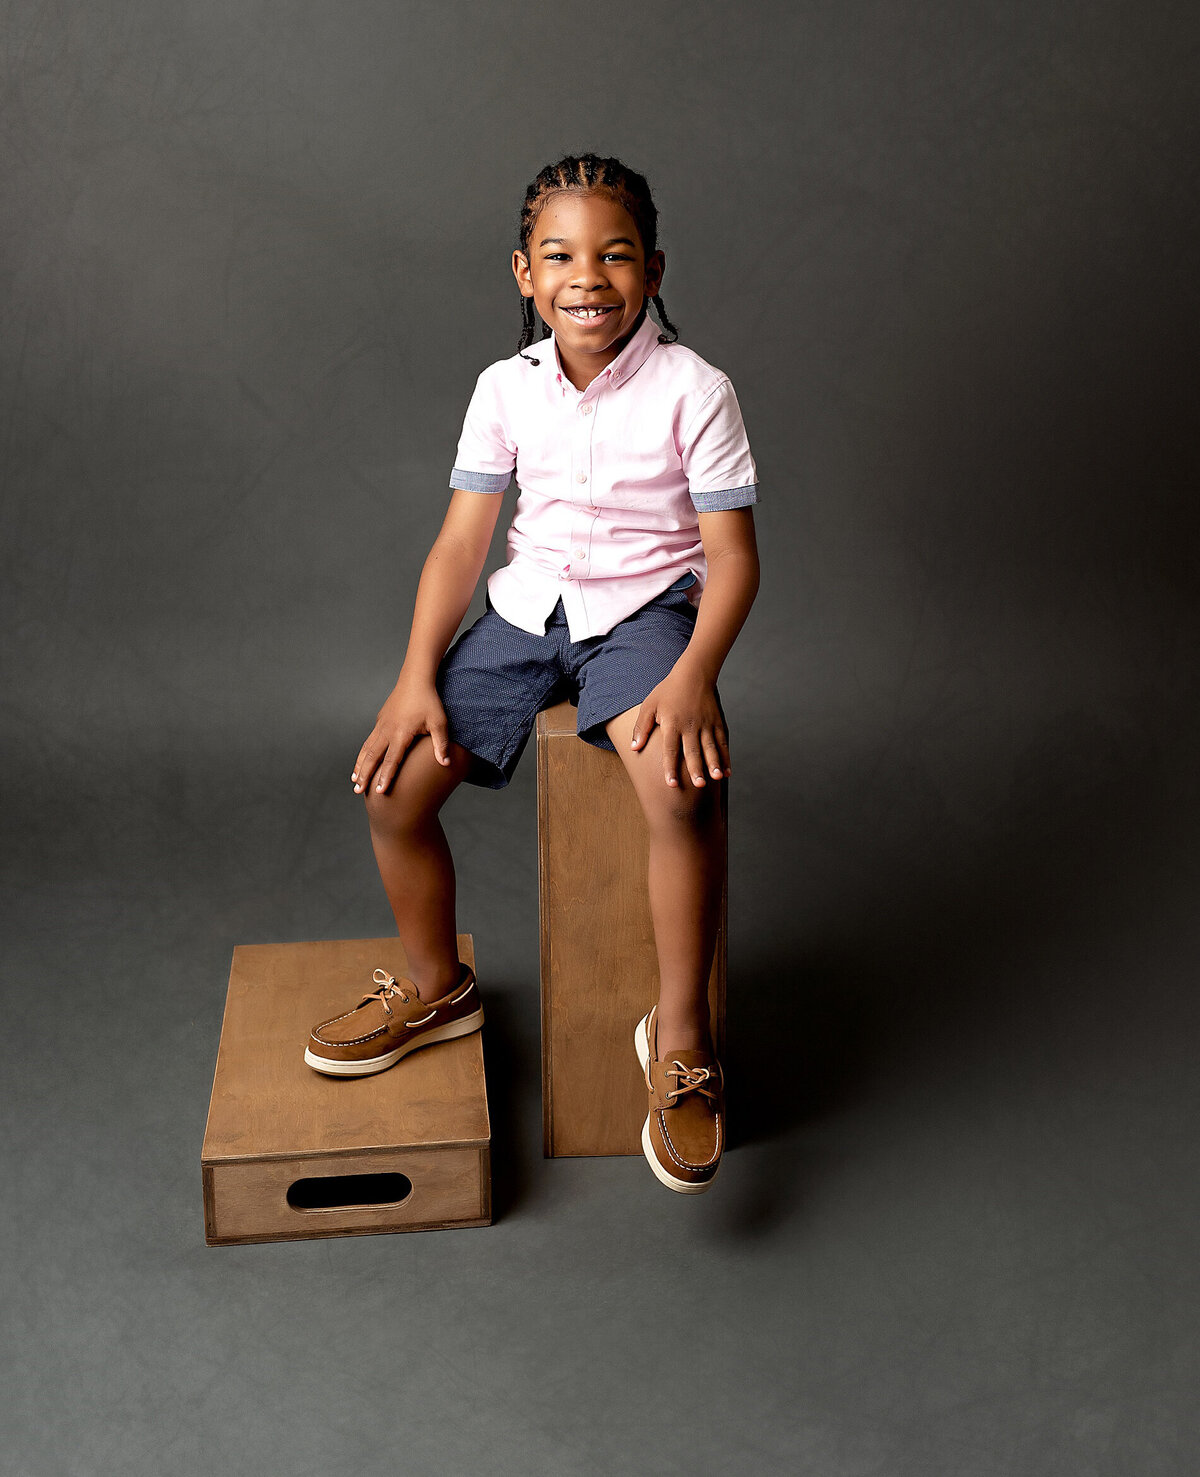 A boy with a contagious laughter, captured in a candid moment during a Brooklyn portrait session